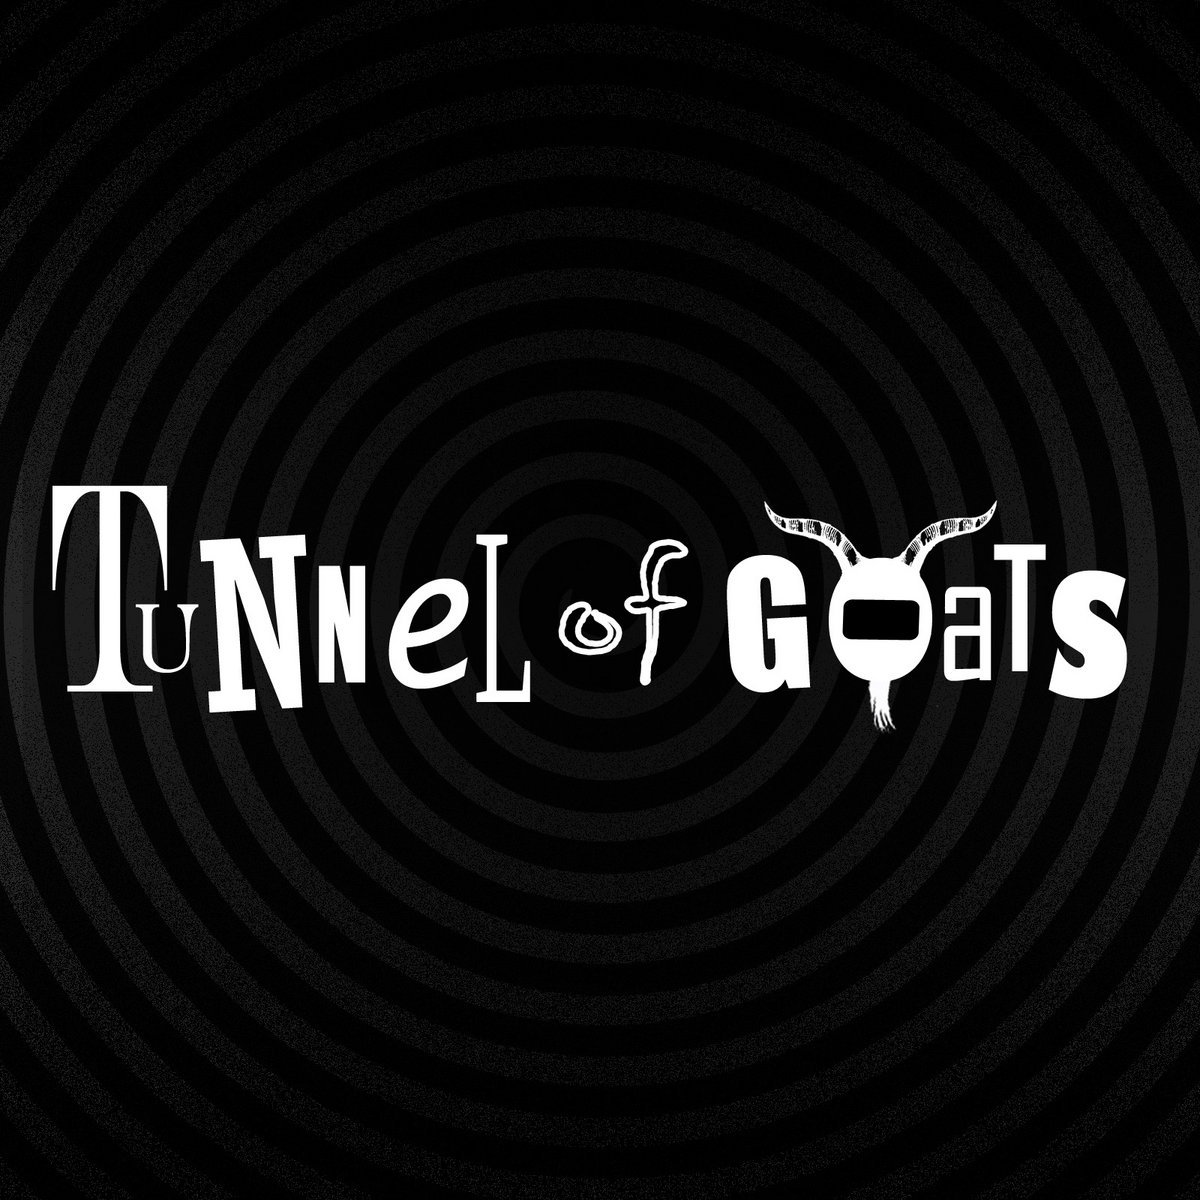 TUNNEL OF GOATS picture